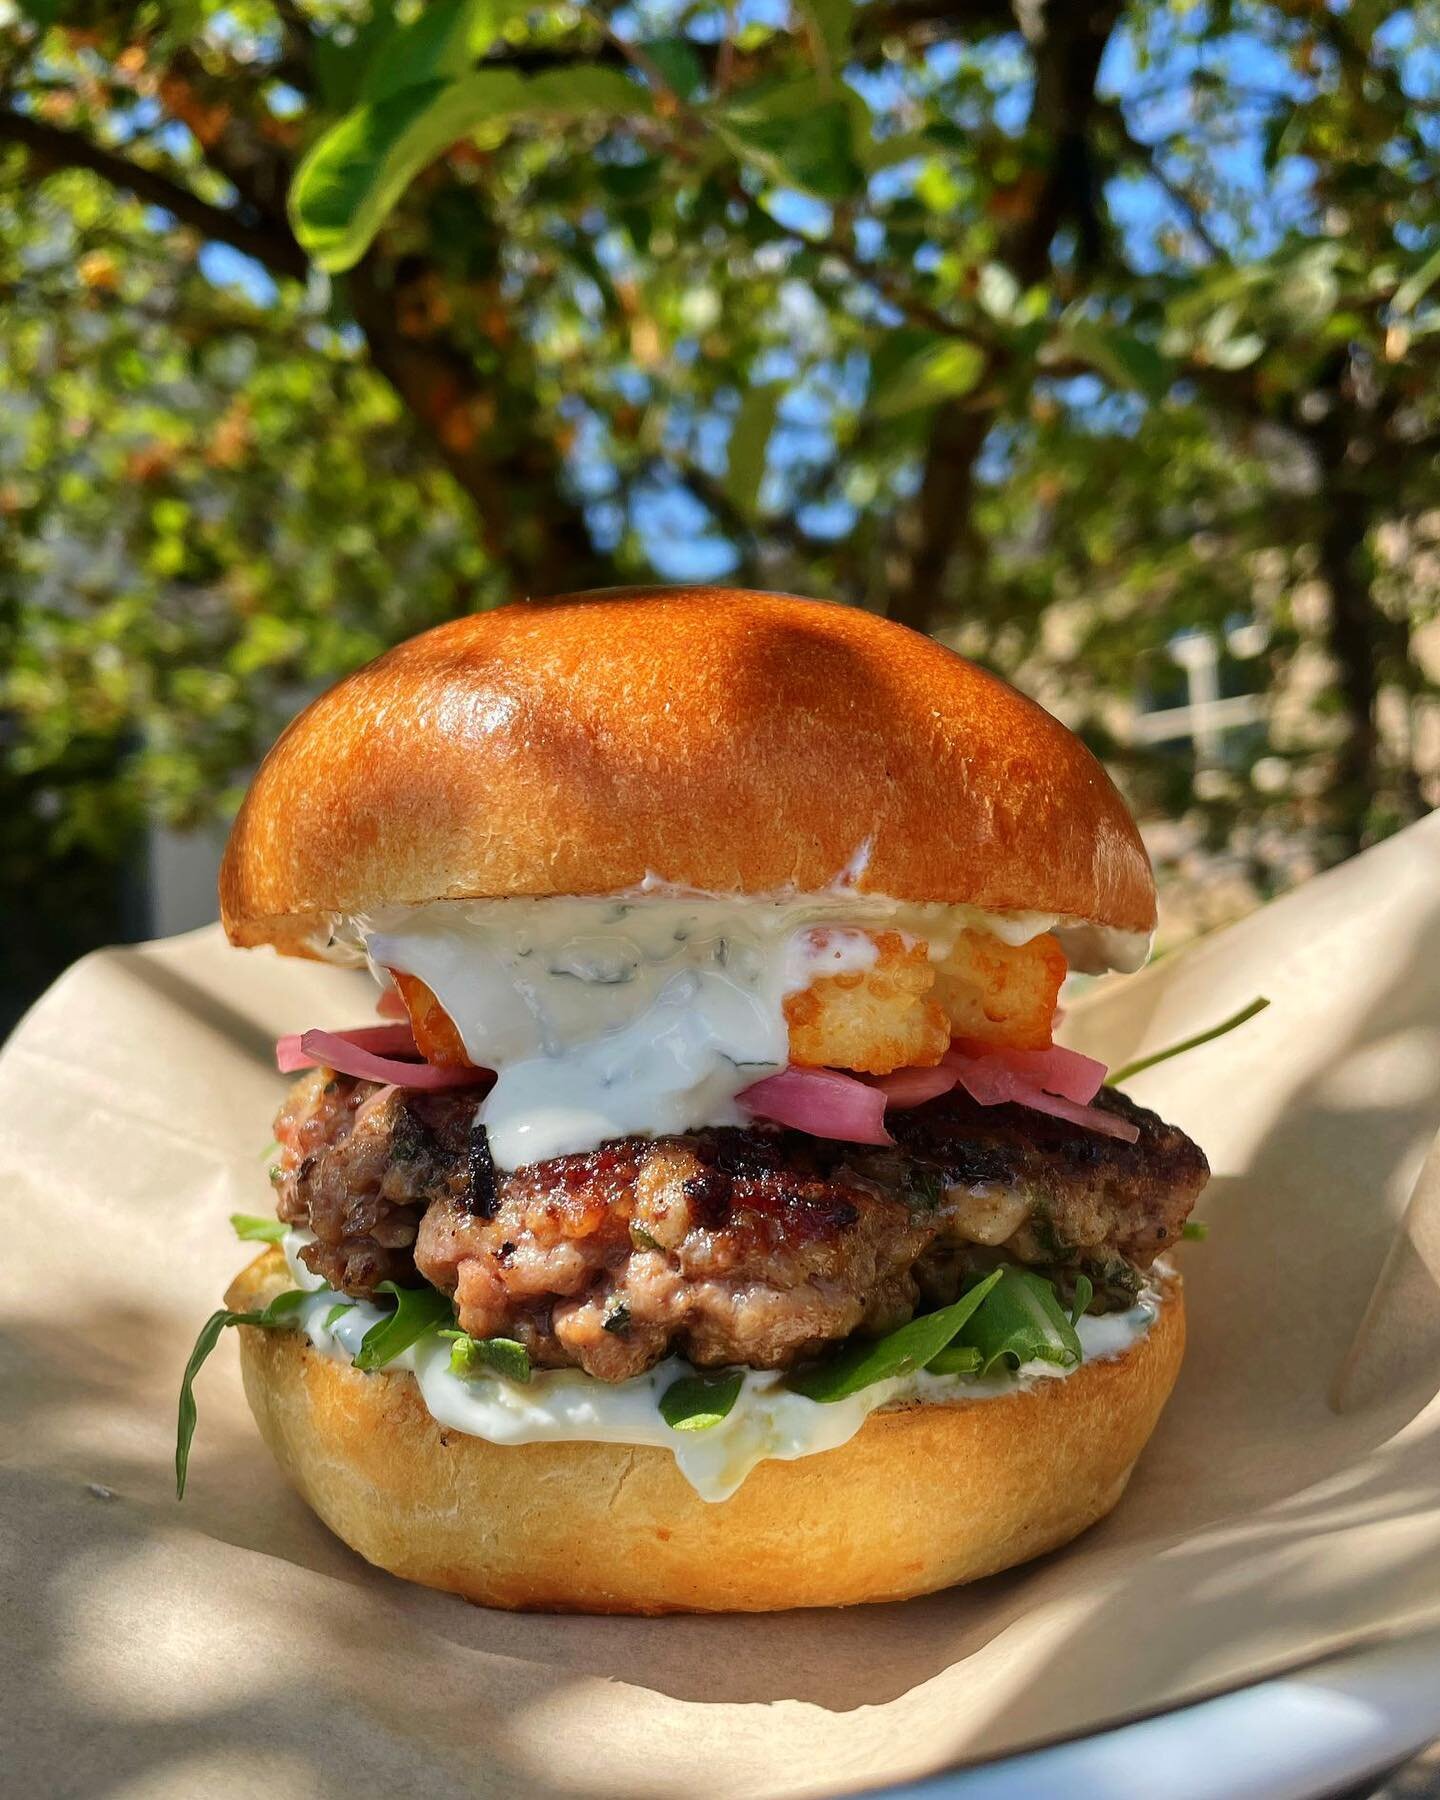 🤔 Decided what you&rsquo;re eating for lunch yet? Nah us neither&hellip;

Jokes 😂

We&rsquo;re totally having today&rsquo;s special Lamb Burger with Halloumi, Pink Pickled Onions, Rocket and Tzatziki 👌

He&rsquo;s available all week!x